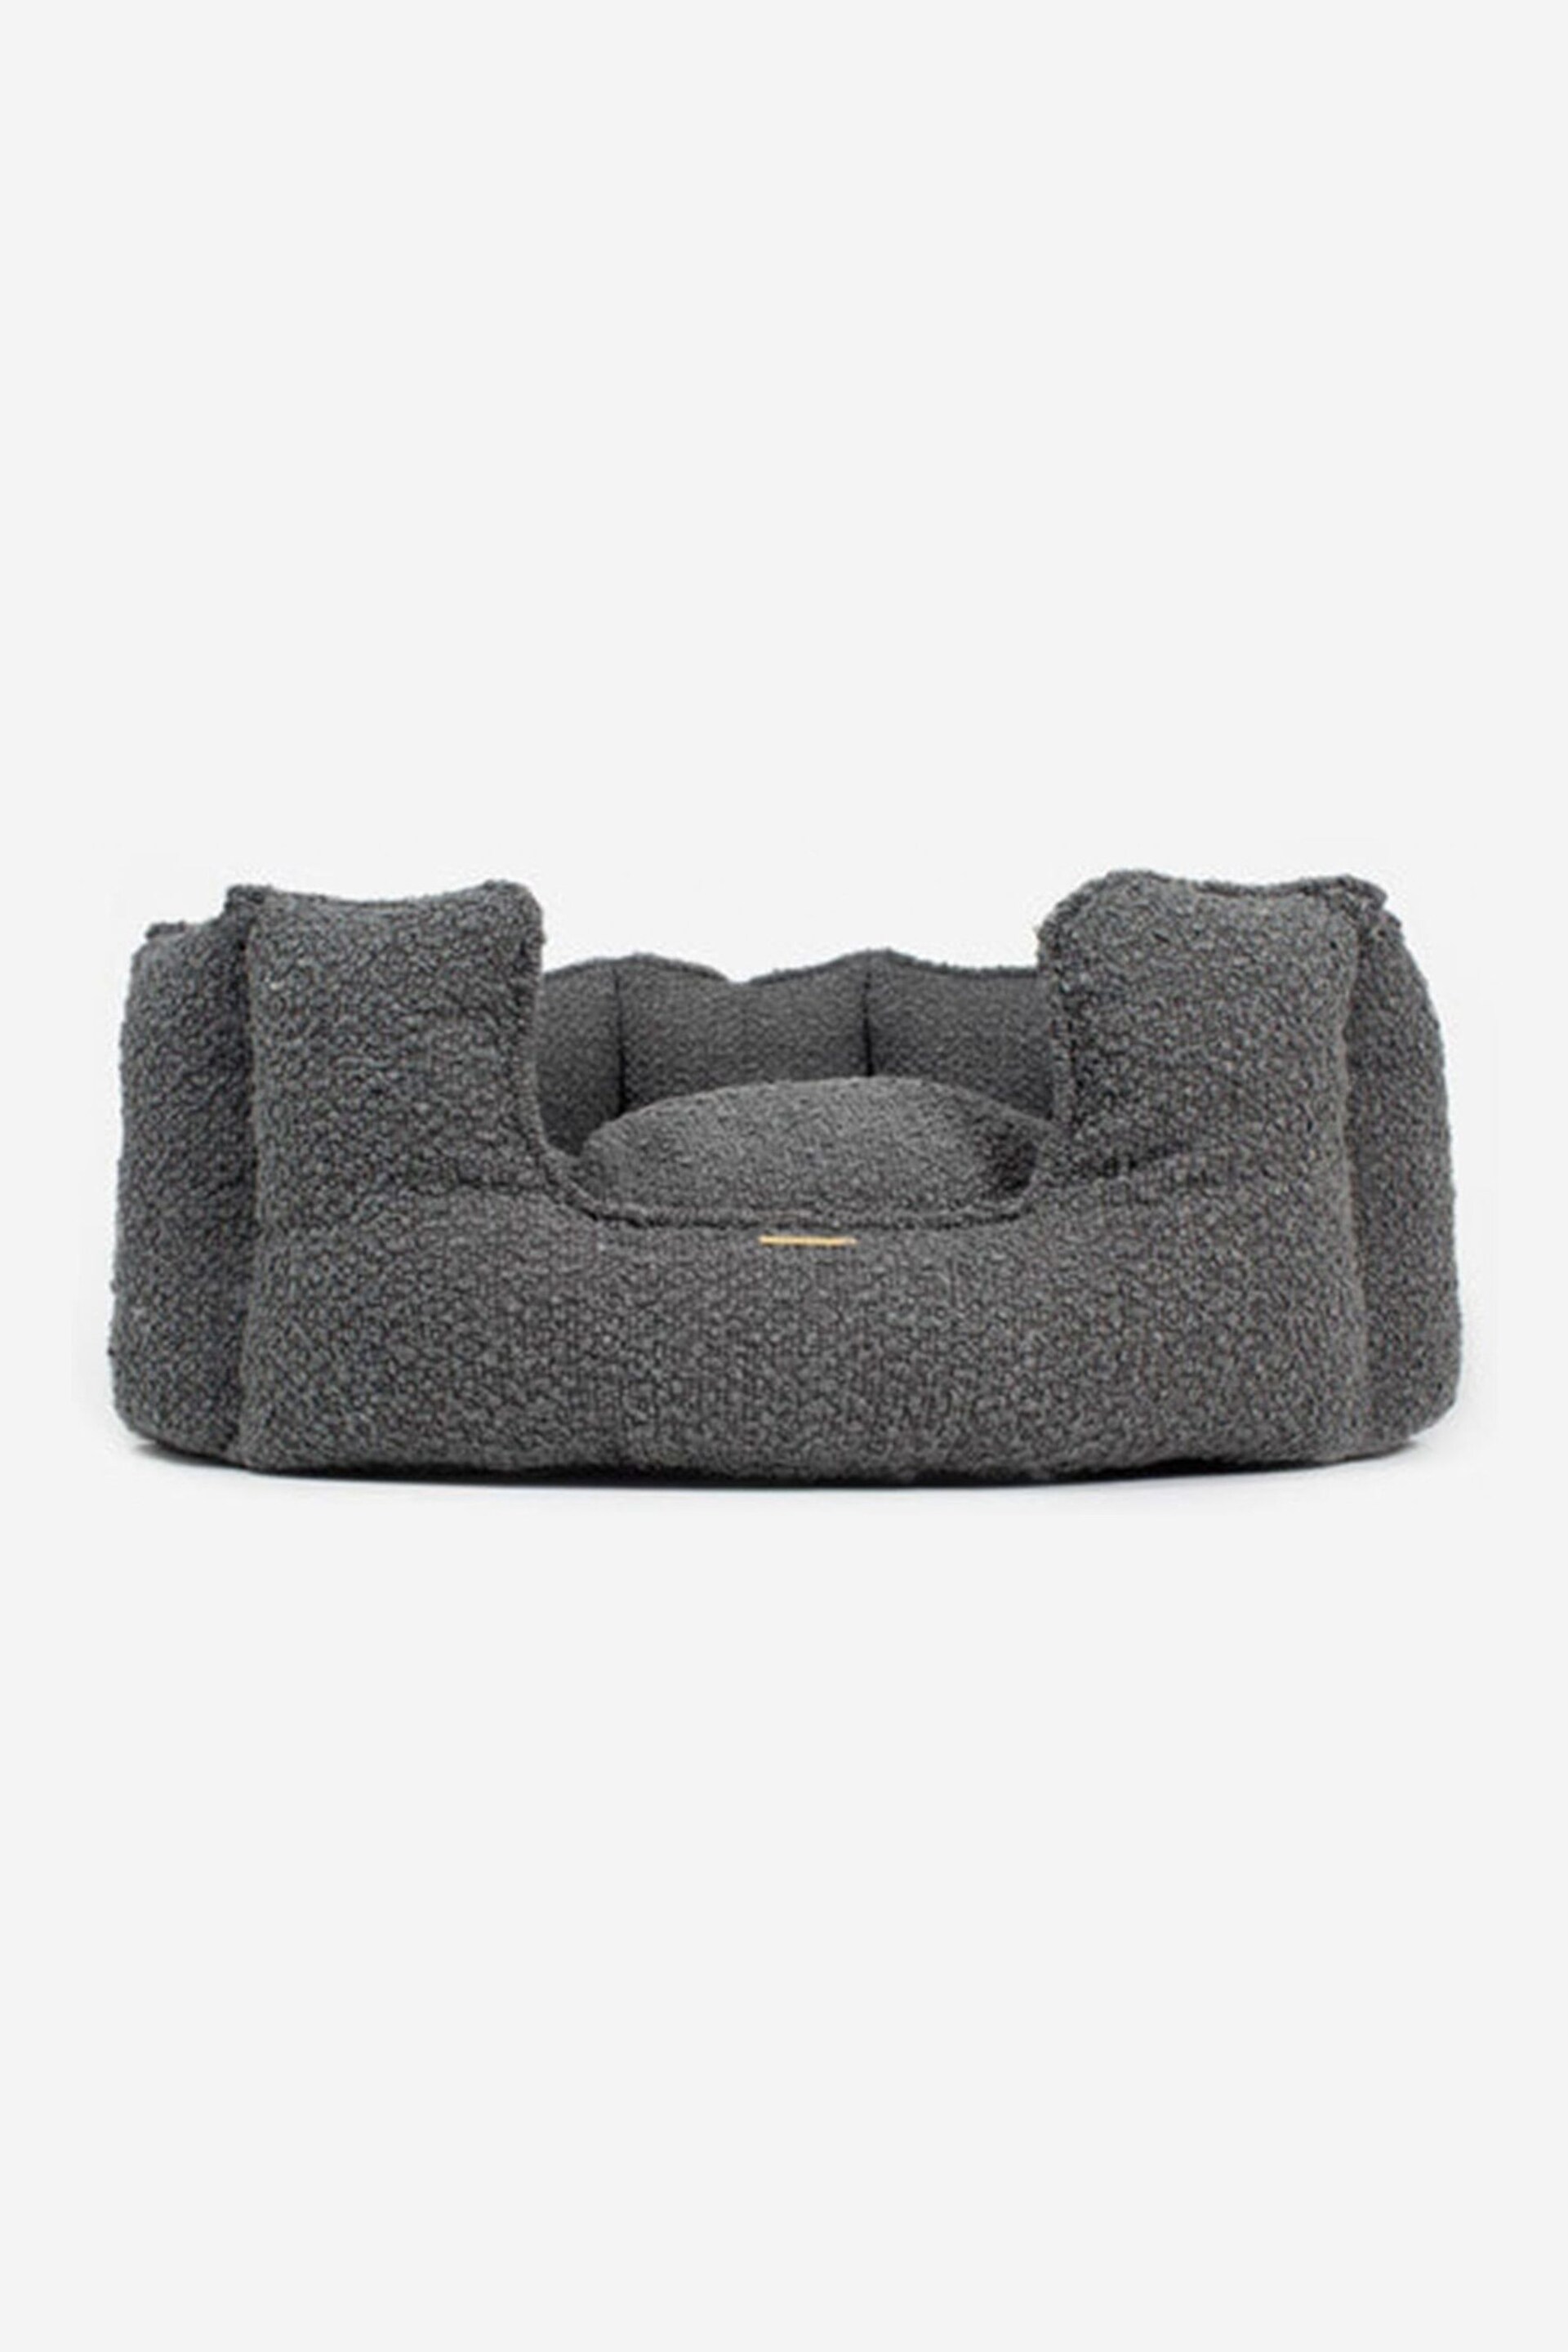 Lords and Labradors Grey High Sided Boucle Dog Bed - Image 2 of 4